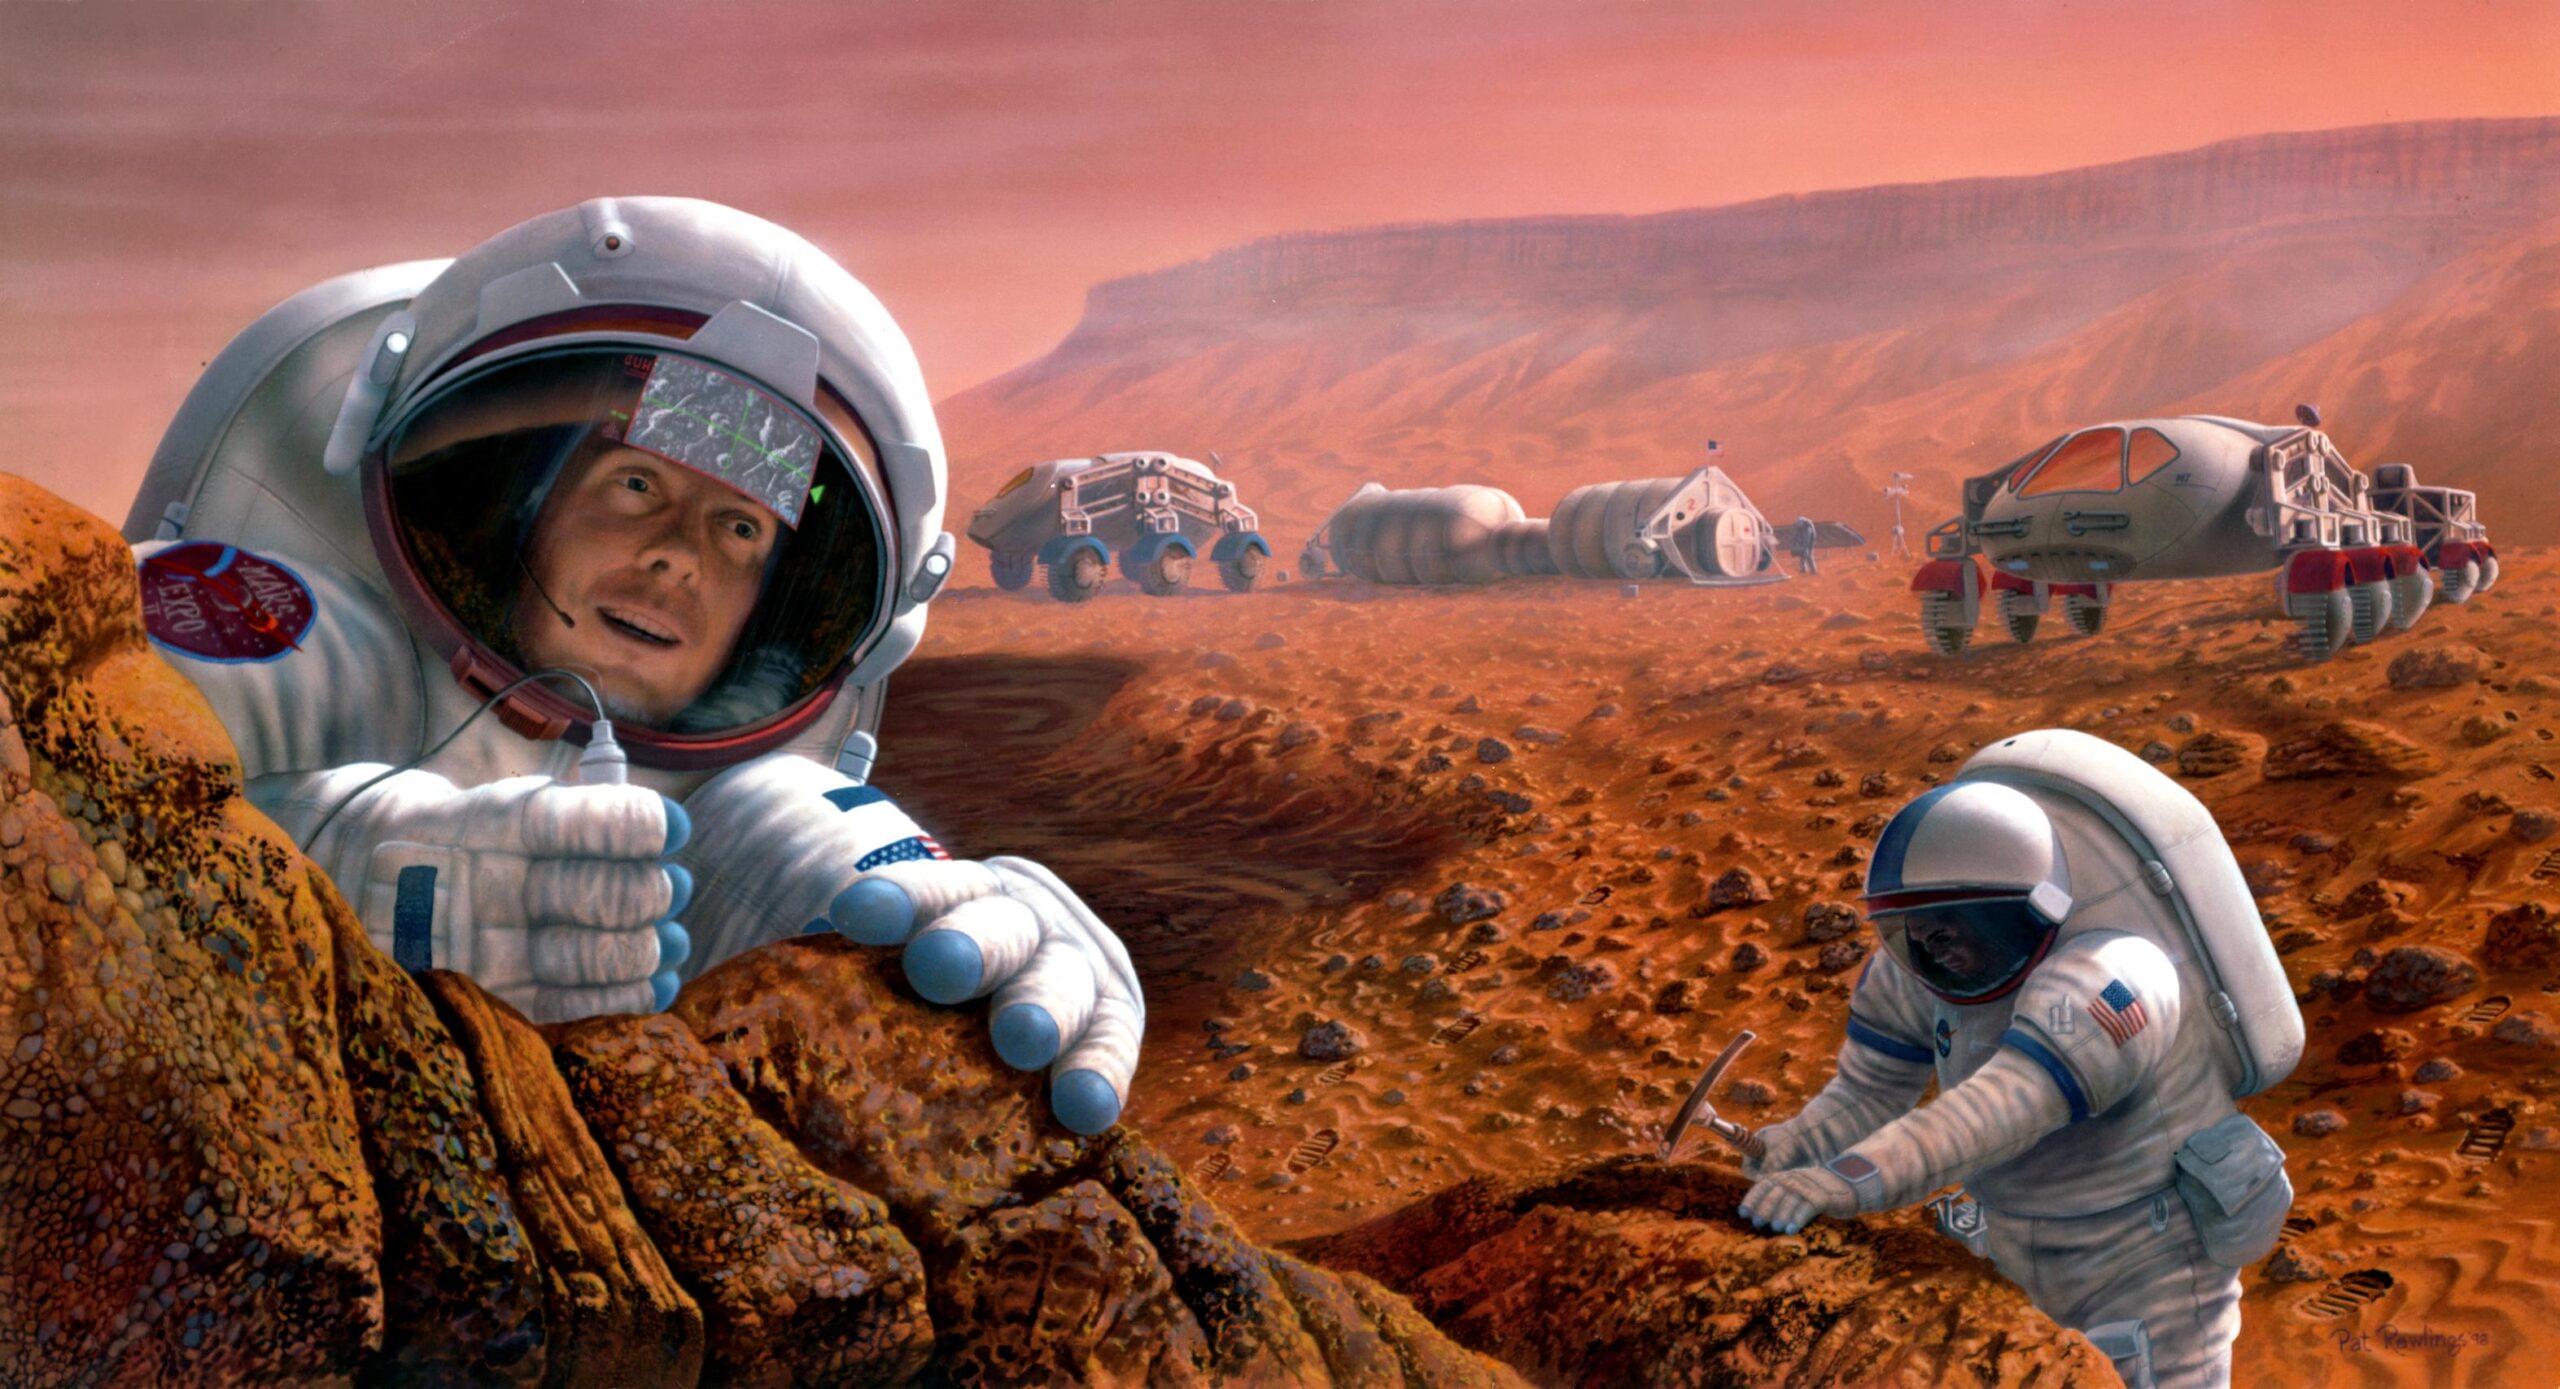 will humans travel to mars